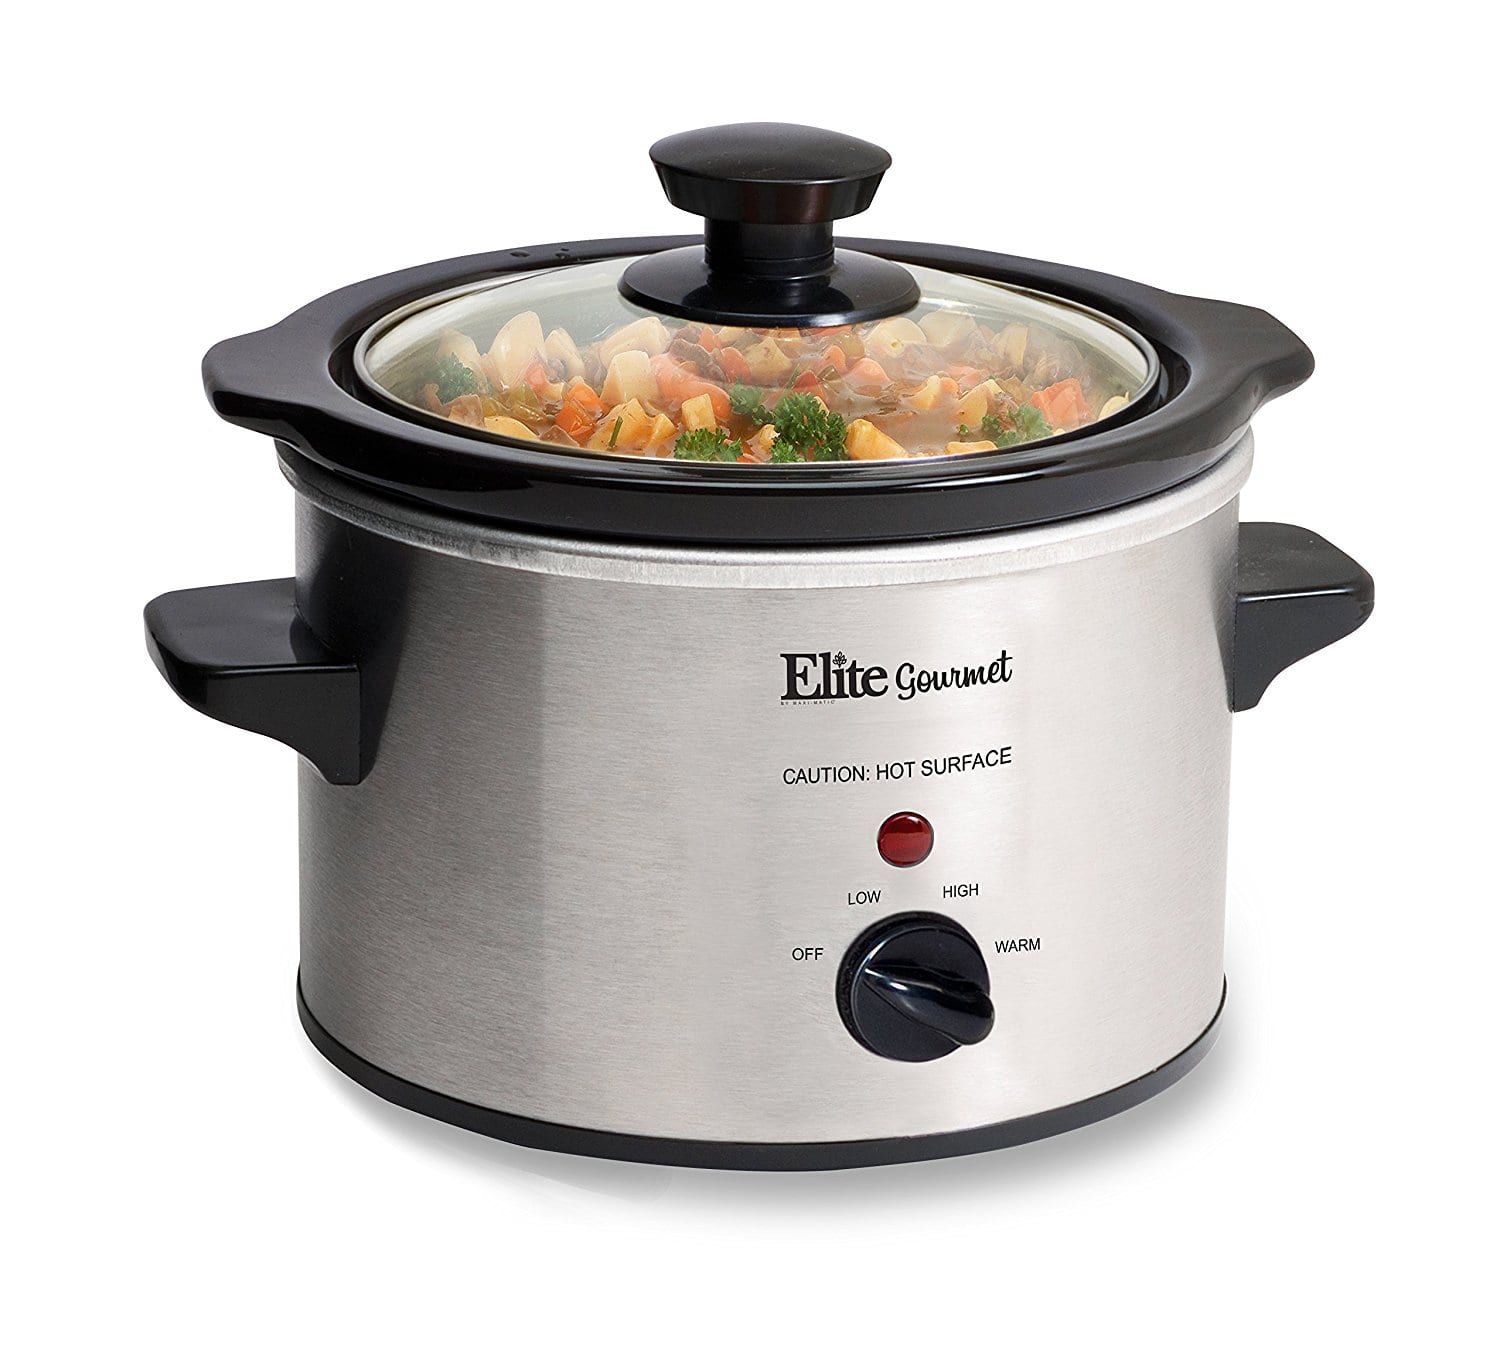 Best Slow Cookers 2017: Small Maximatic Elite Slow Cooker 2018